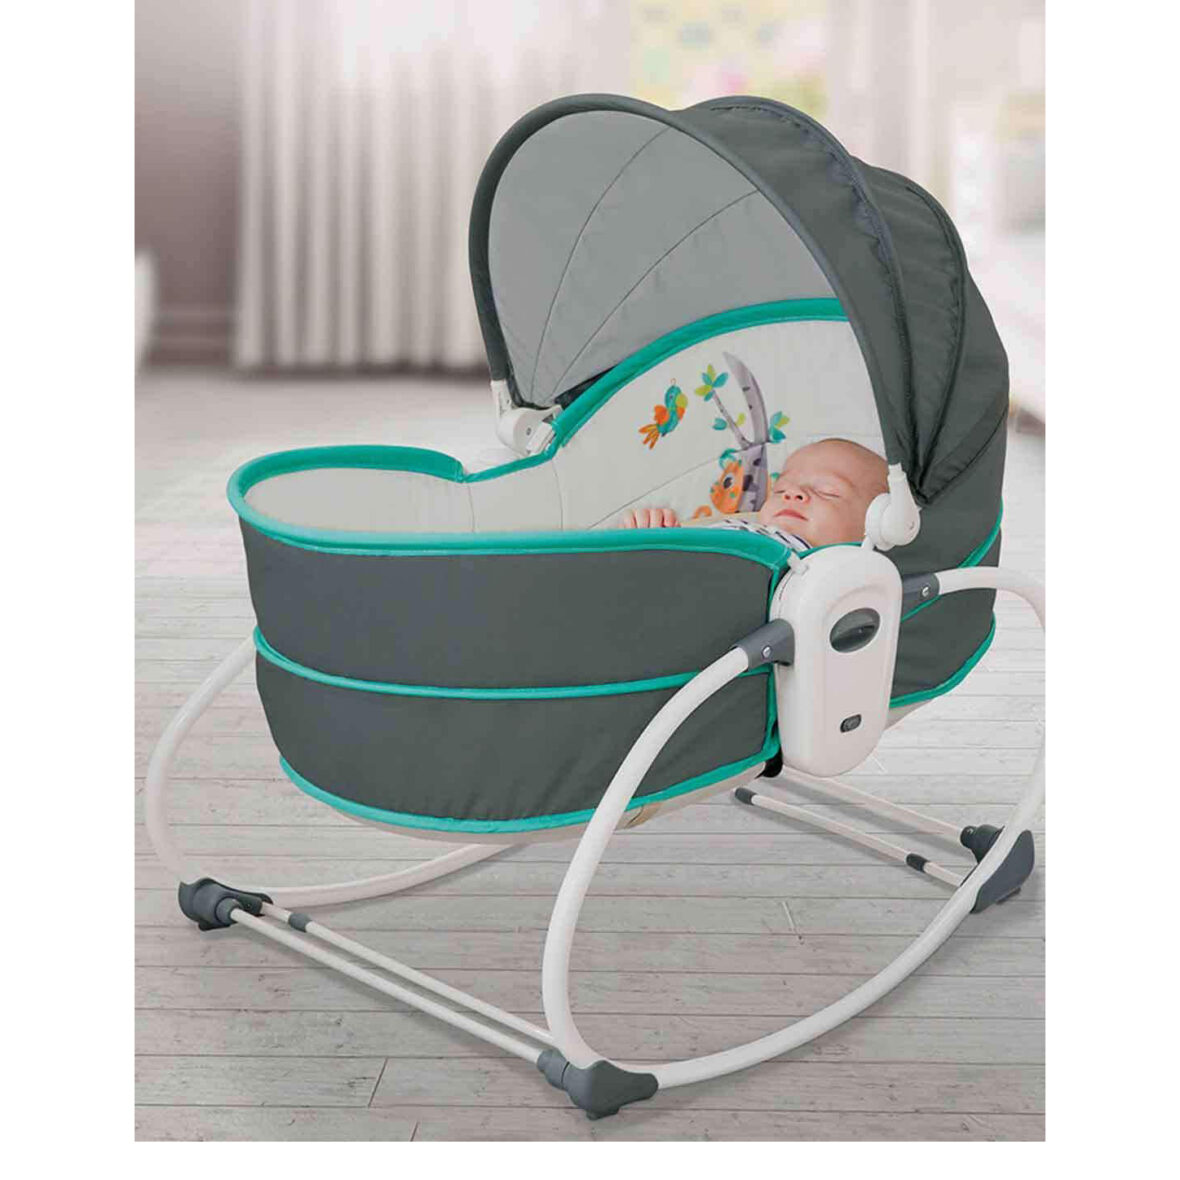 Mastela 5 in 1 Baby Bassinet Rocker Rocking Napper, Bounce, Chair with Removable Baby Bassinet & Melody (Multi Color)